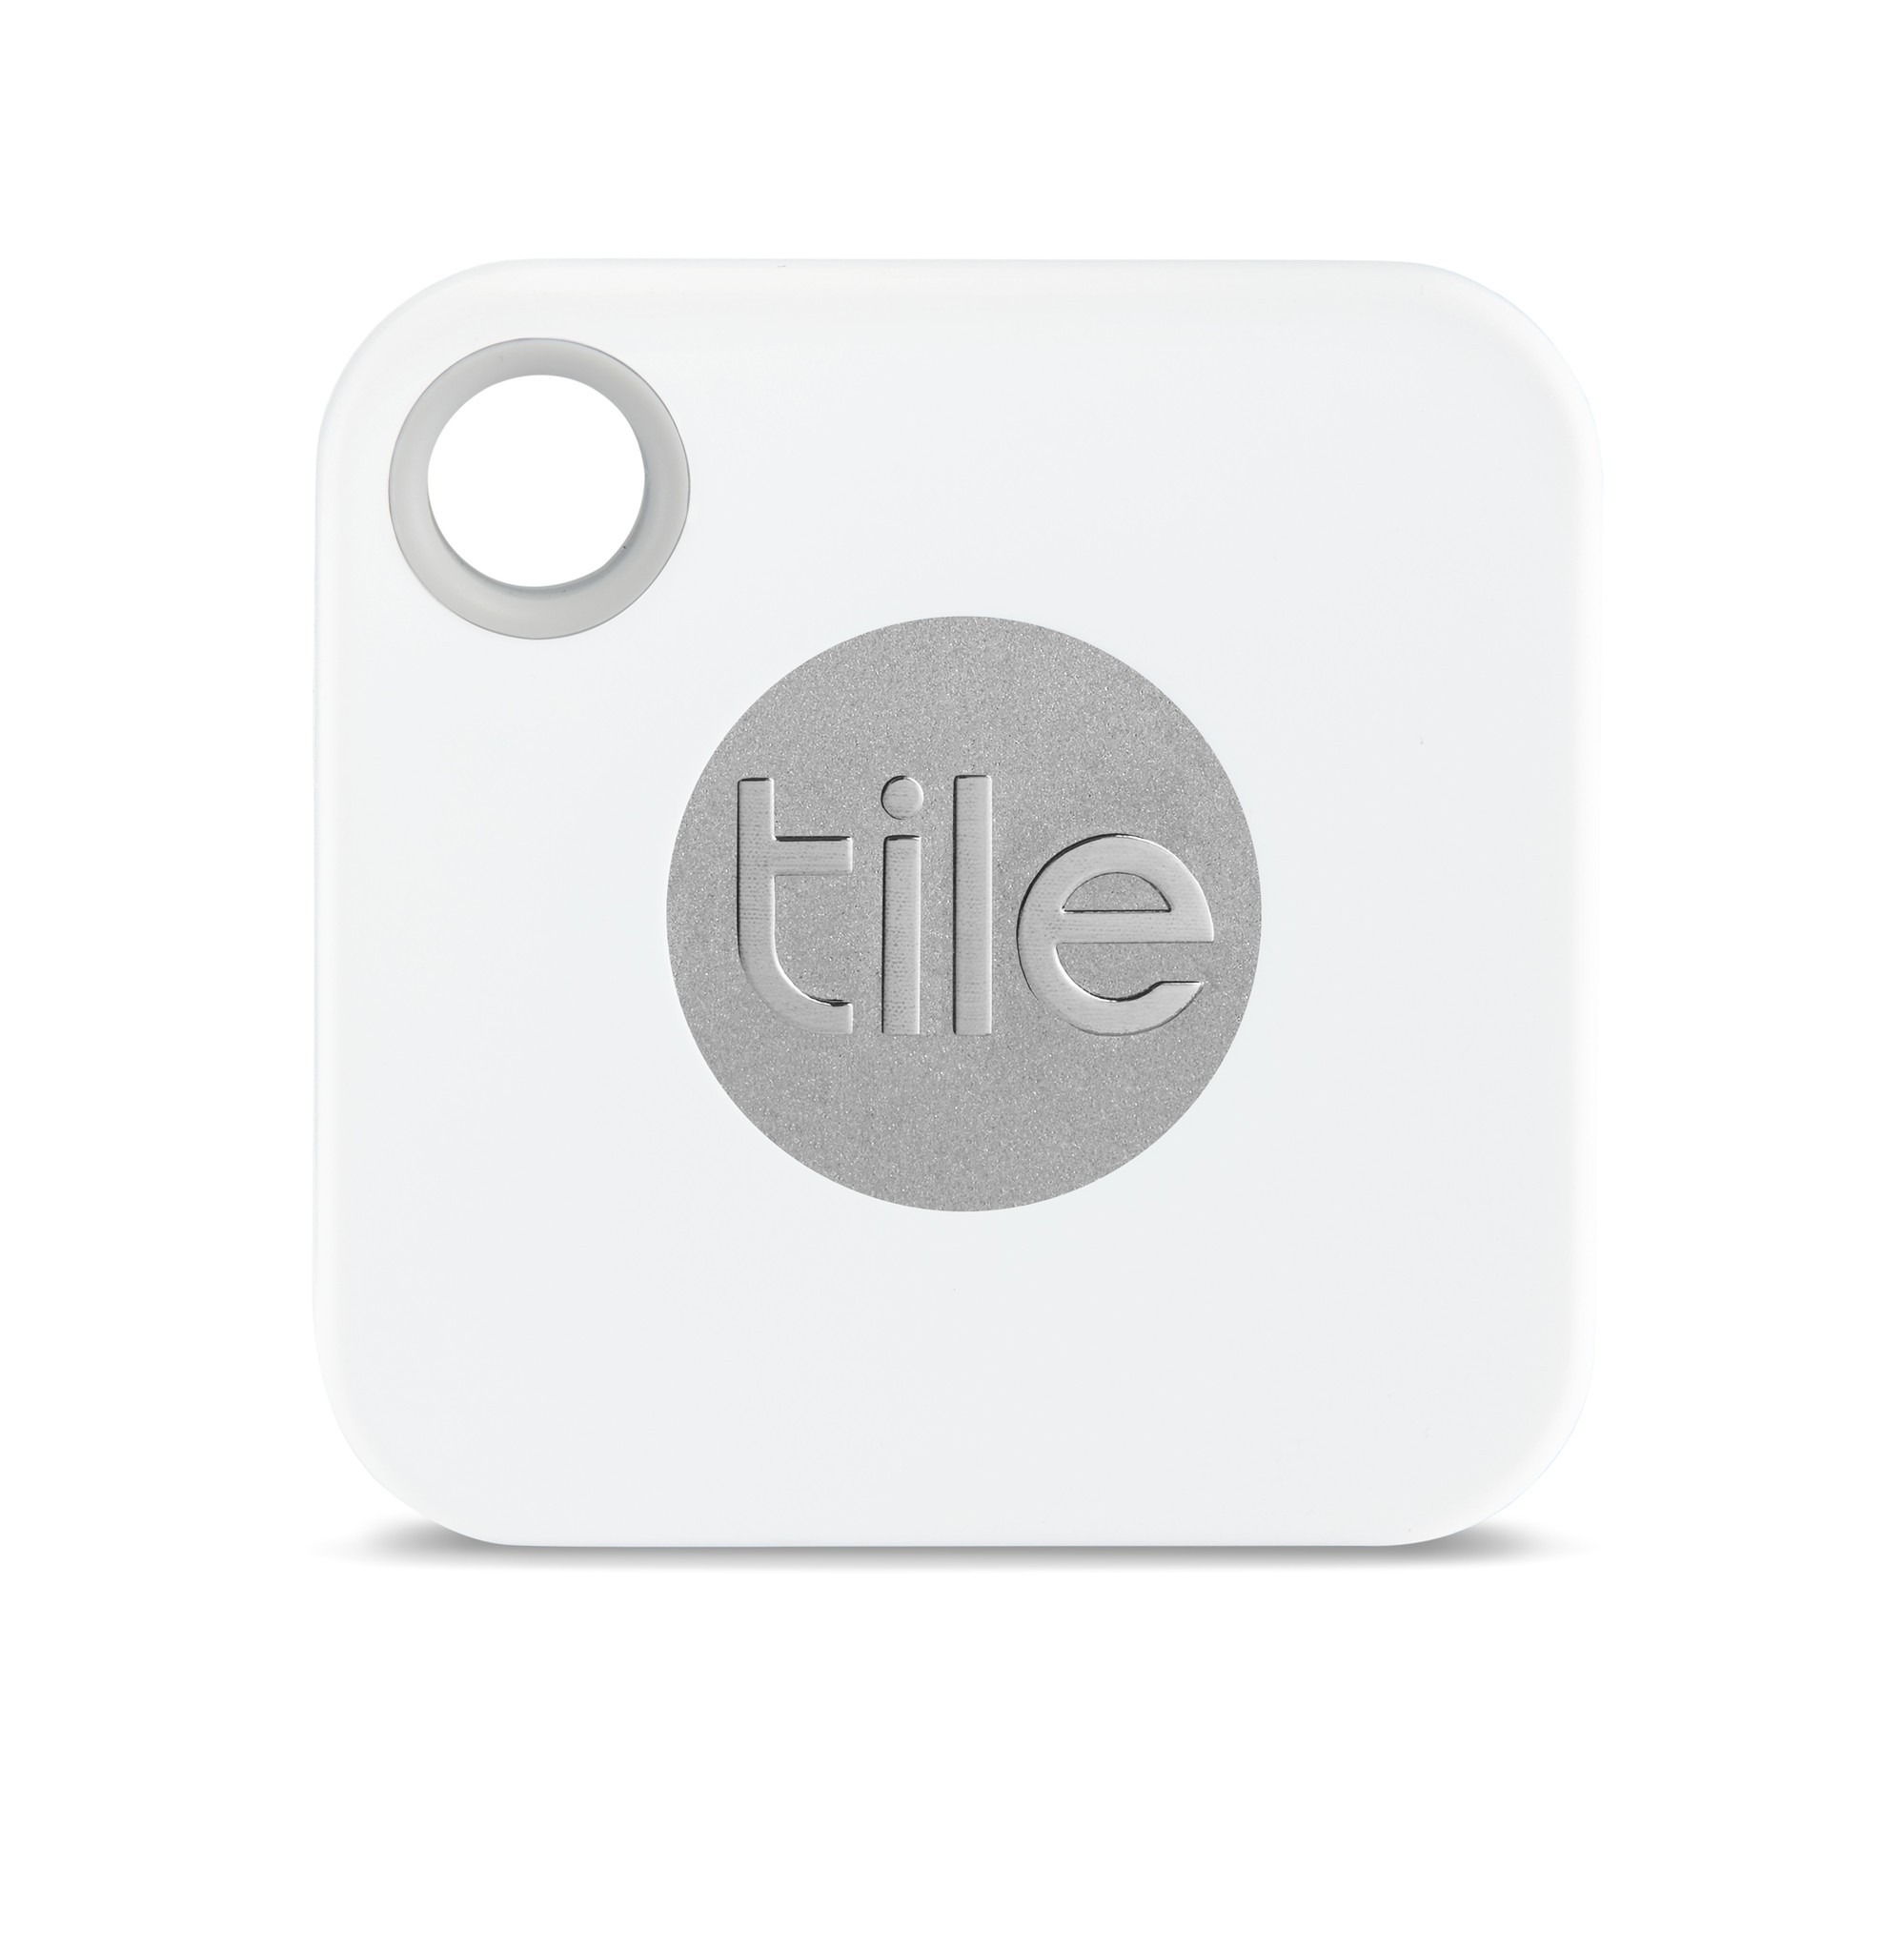 Should You Get Tile Premium Imore, What Is Tile